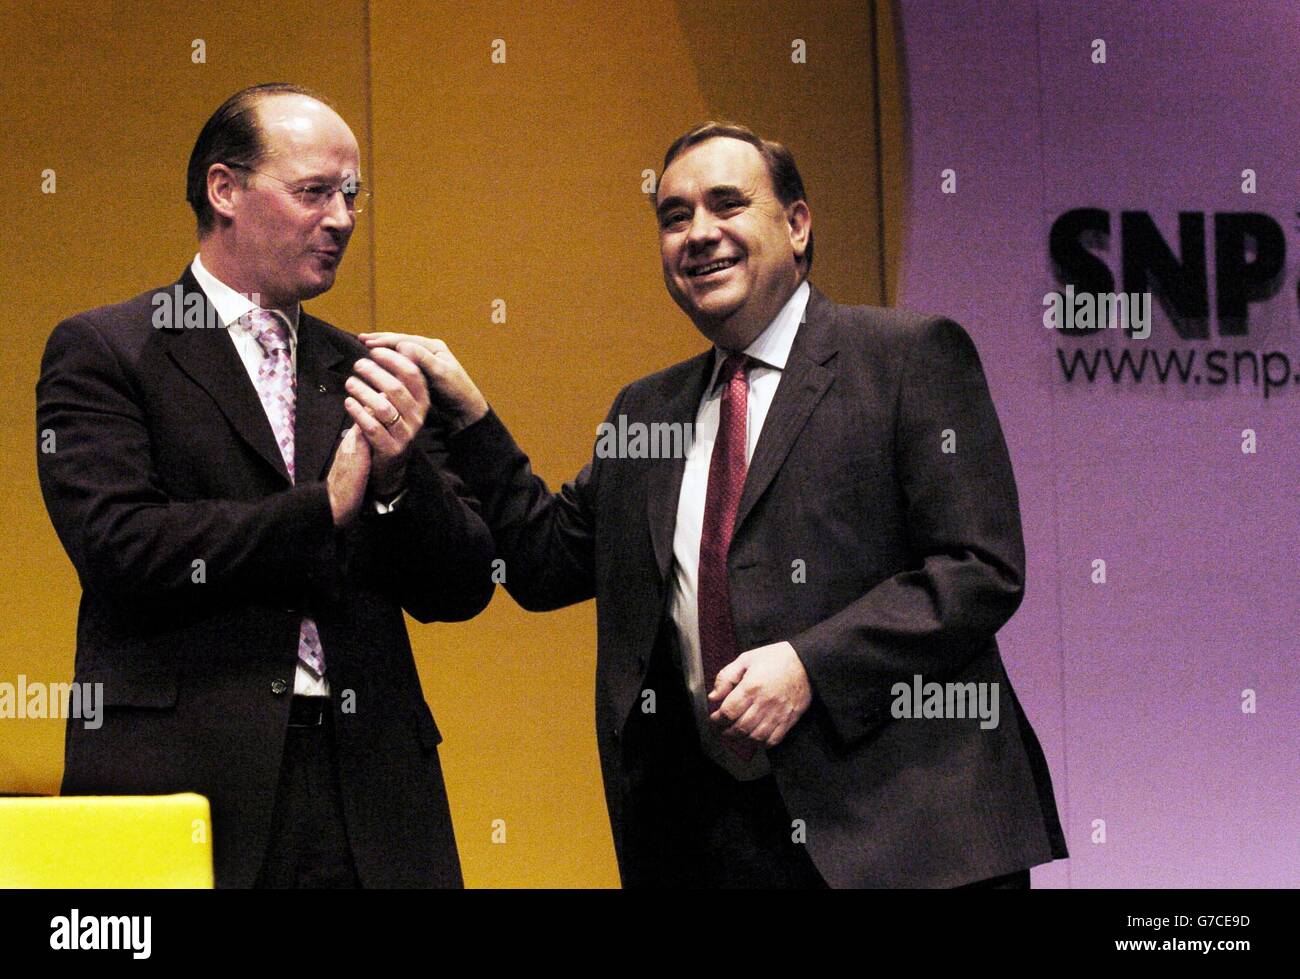 Alex Salmond (right) leader of the Scottish National Party celebrates after his speech with John Swinney at the SNP Conference in Inverness. Stock Photo